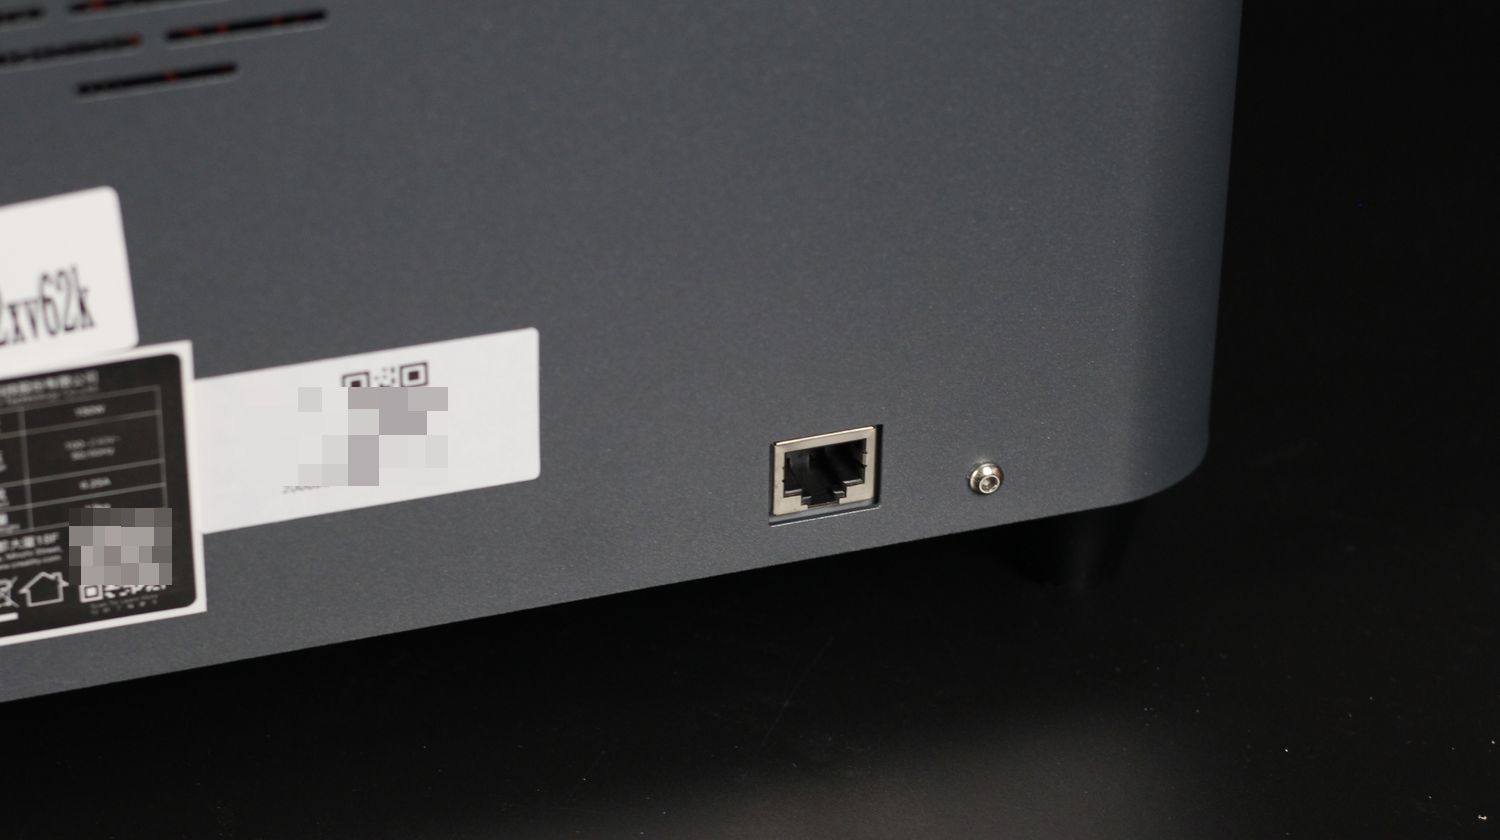 Halot Mage Pro RJ 45 connector | Creality Halot Mage Pro Review: Great Prints, Bad Software